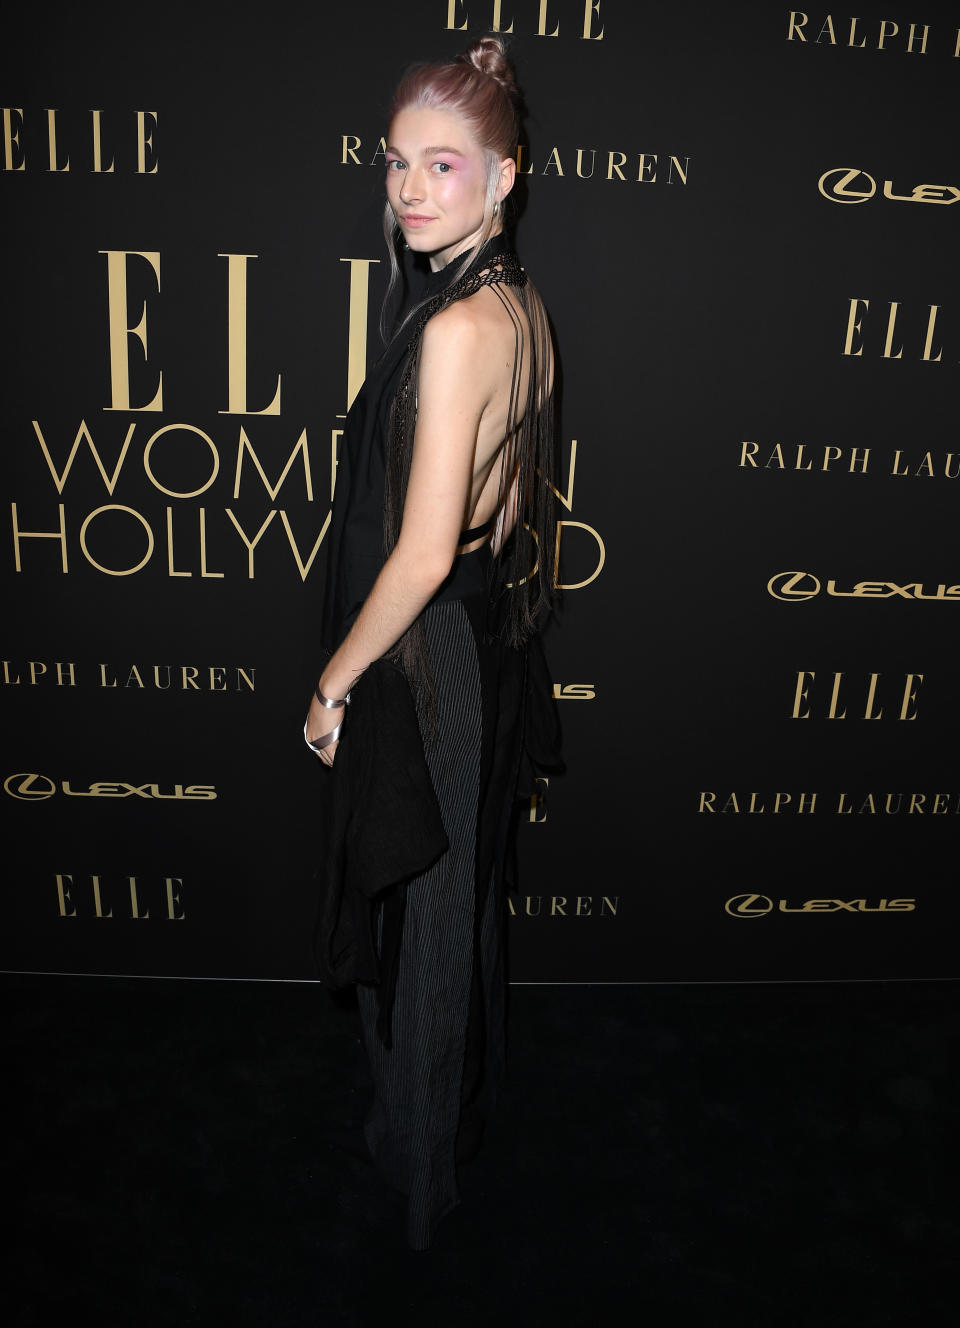 BEVERLY HILLS, CALIFORNIA - OCTOBER 14: Hunter Schafer arrives at the 2019 ELLE Women In Hollywood at the Beverly Wilshire Four Seasons Hotel on October 14, 2019 in Beverly Hills, California. (Photo by Steve Granitz/WireImage)